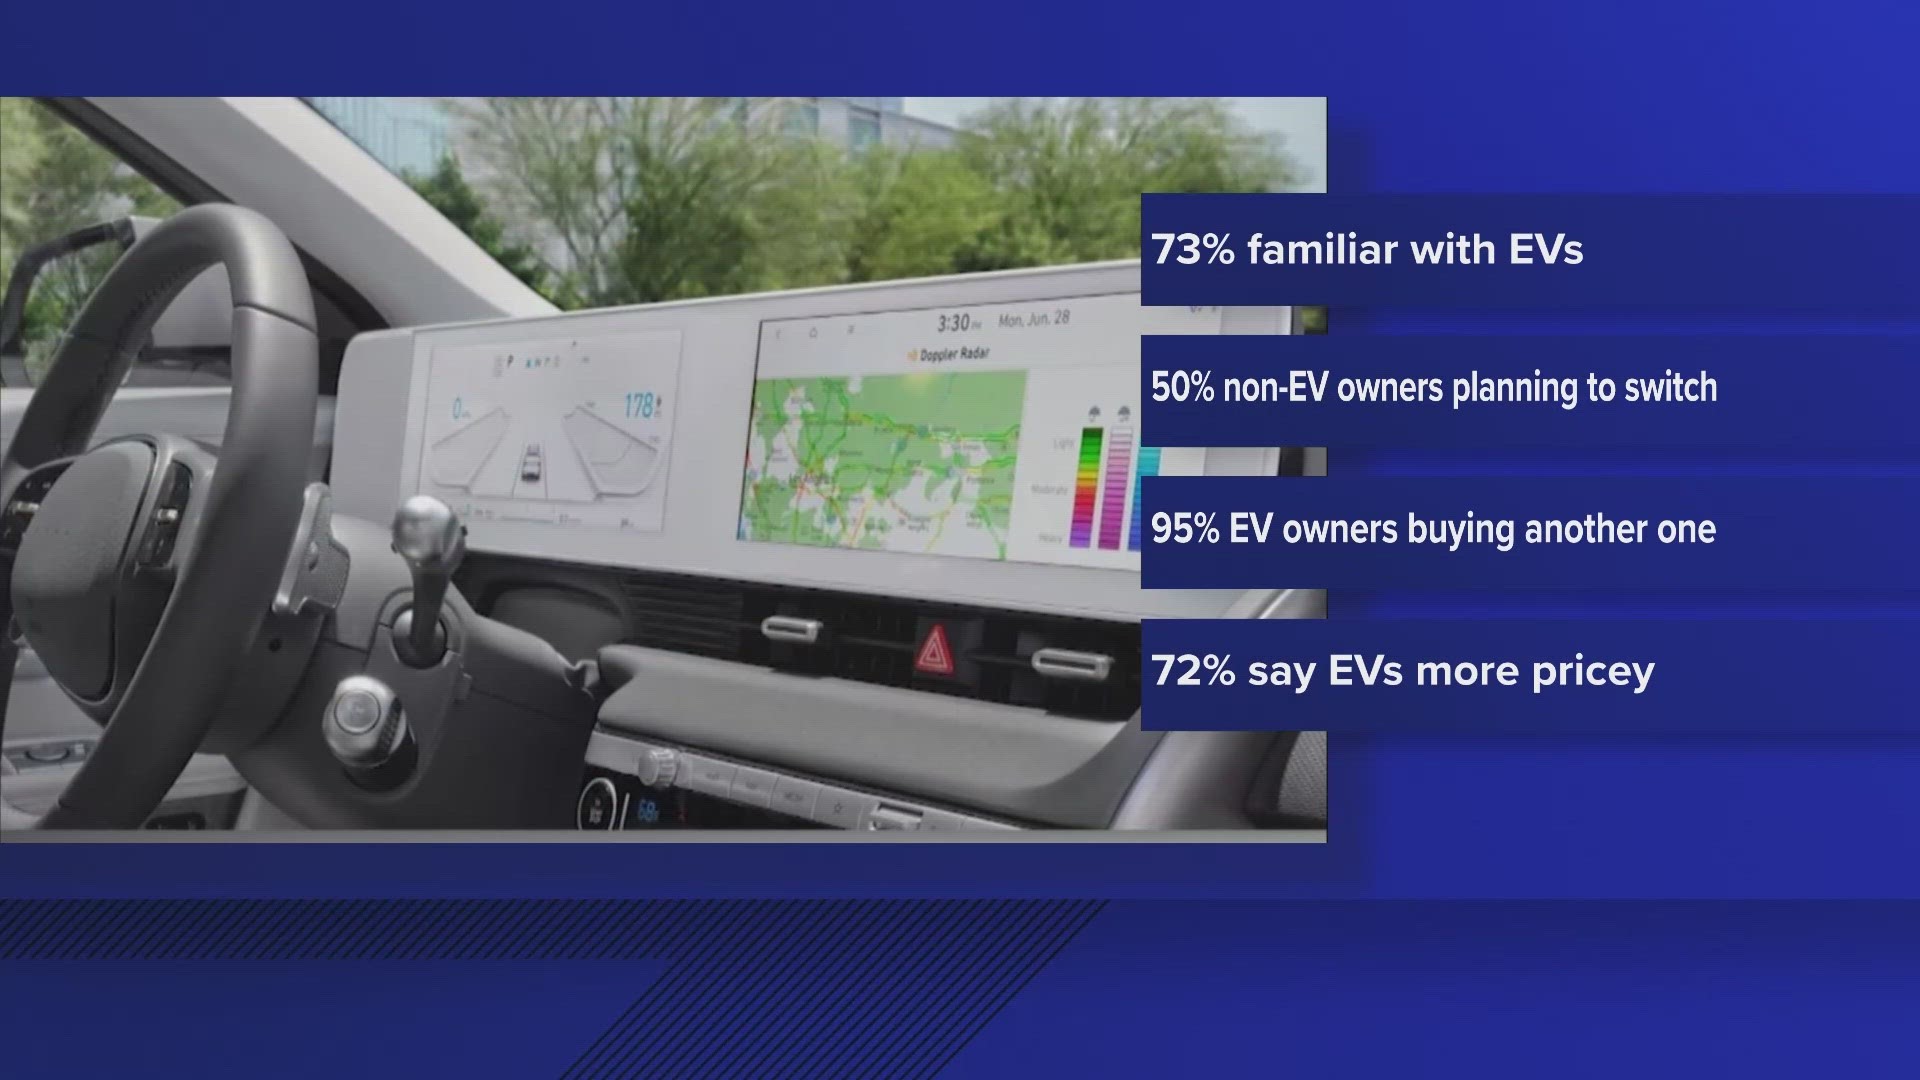 The Colorado Energy Office and EV CO surveyed over 2,000 people in the state.